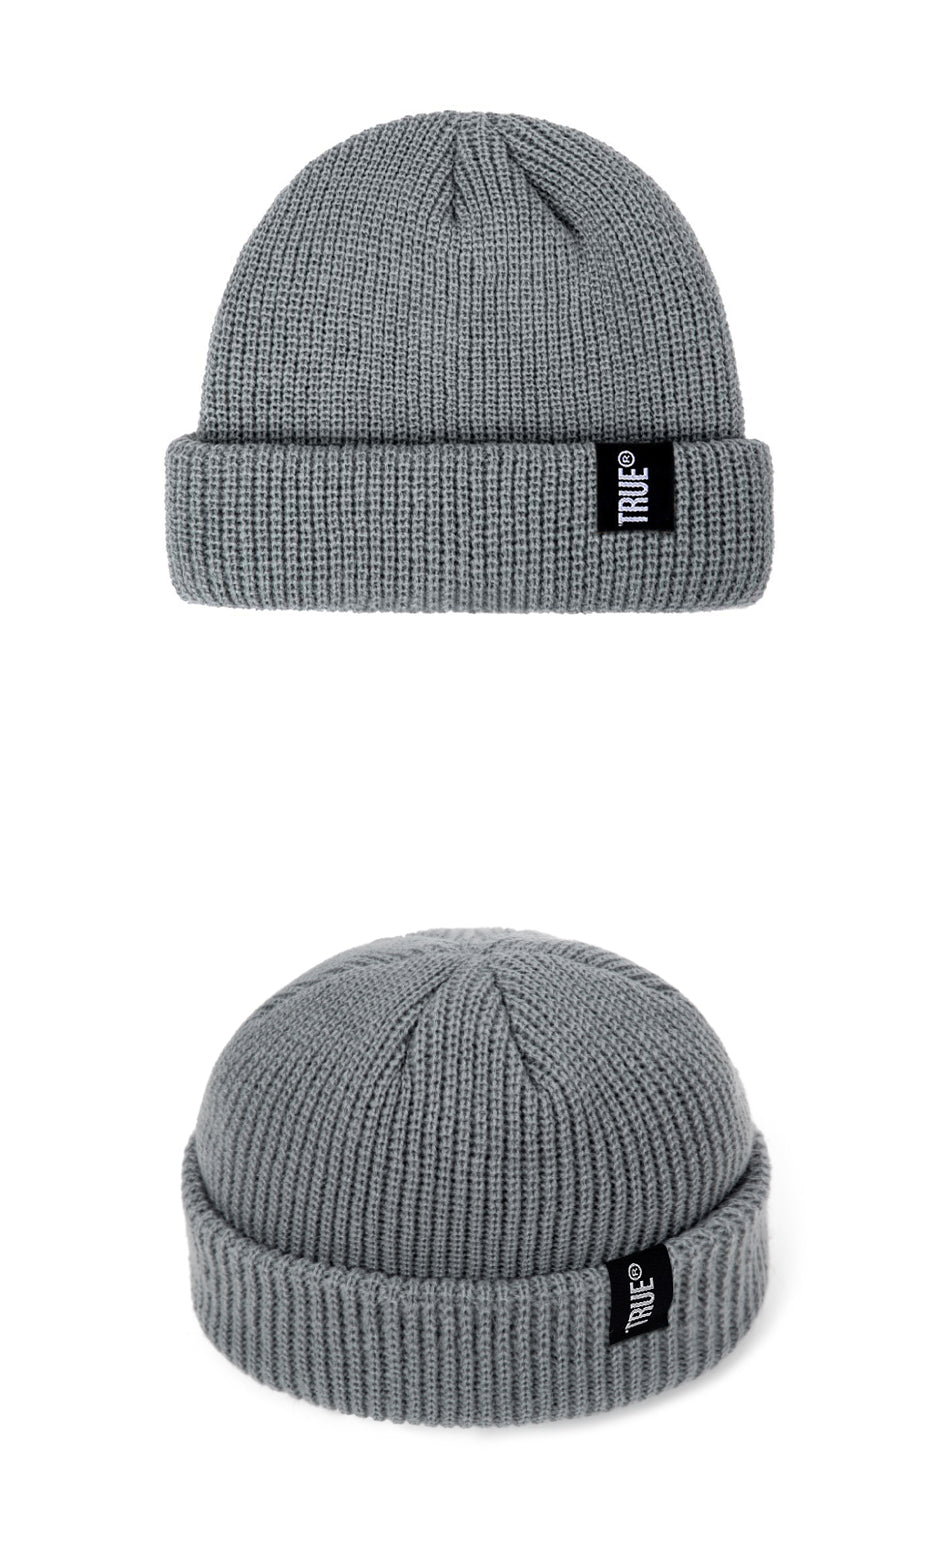 Unisex Knitted Wool Mens Grey Beanie For Autumn/Winter 2021 Classic Color  Block Design For Sports, Leisure, Running, And Warmth From Whj1991, $12.67